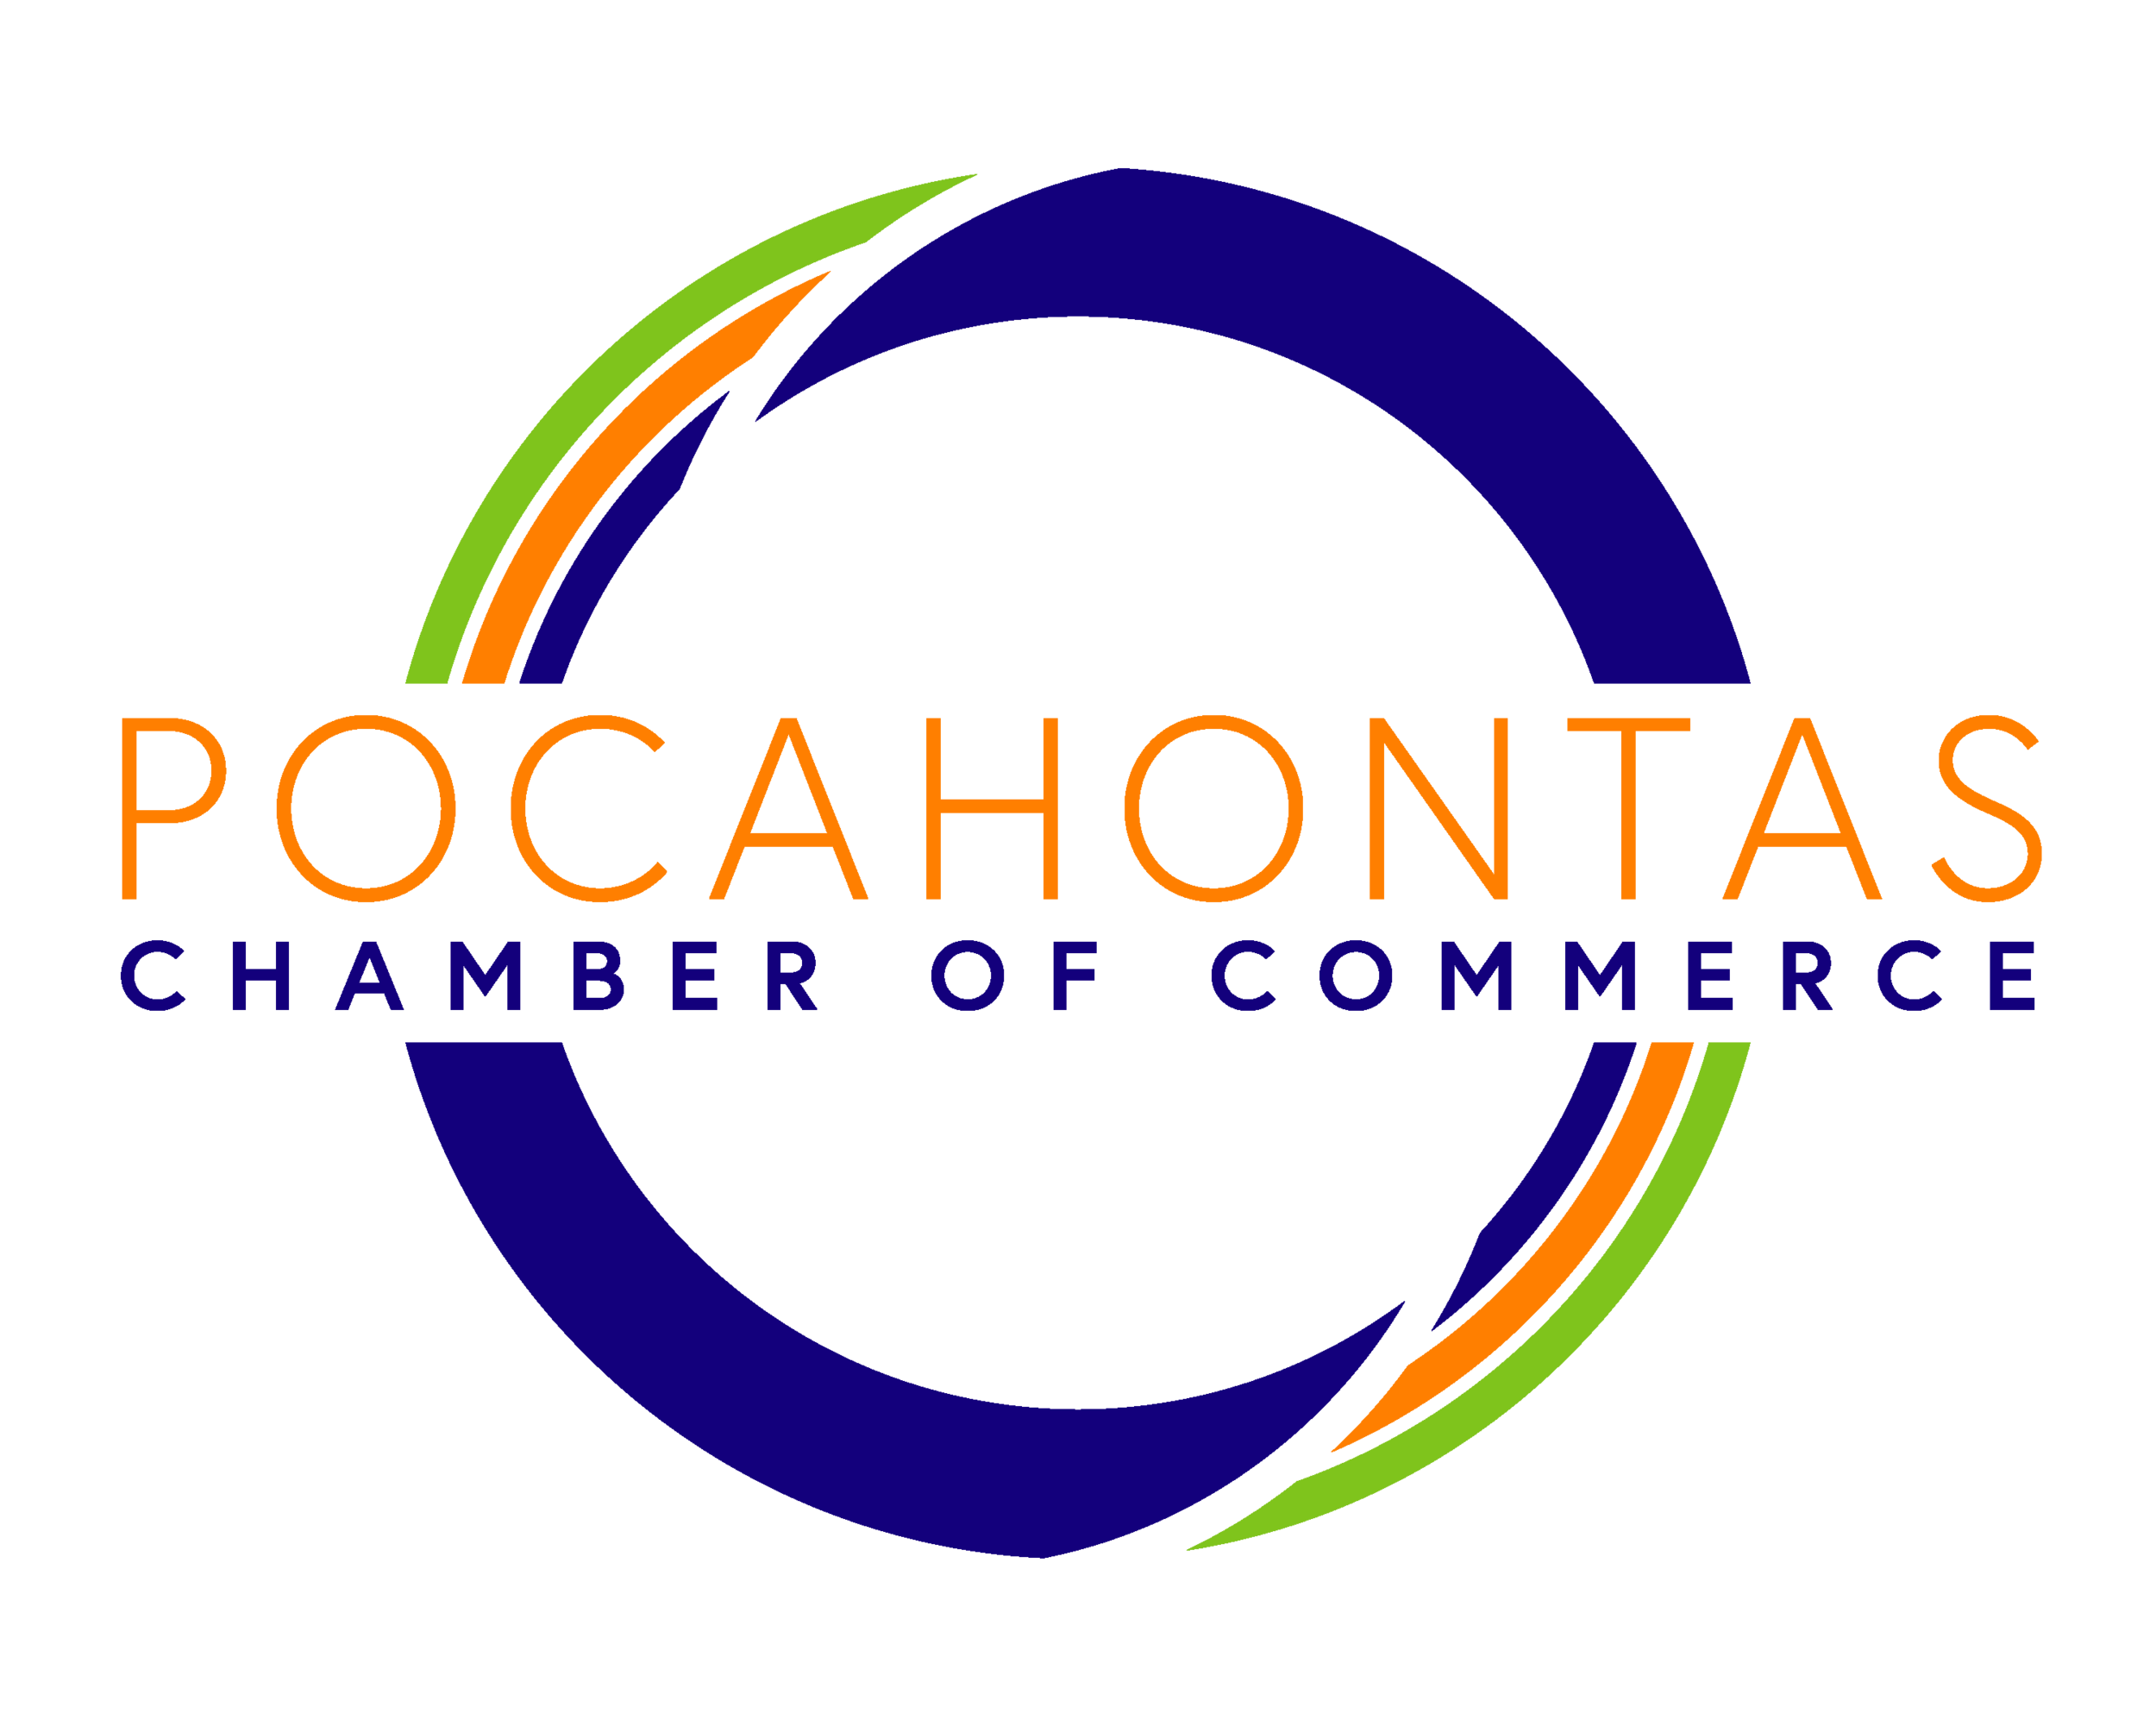 Pocahontas Chamber of Commerce